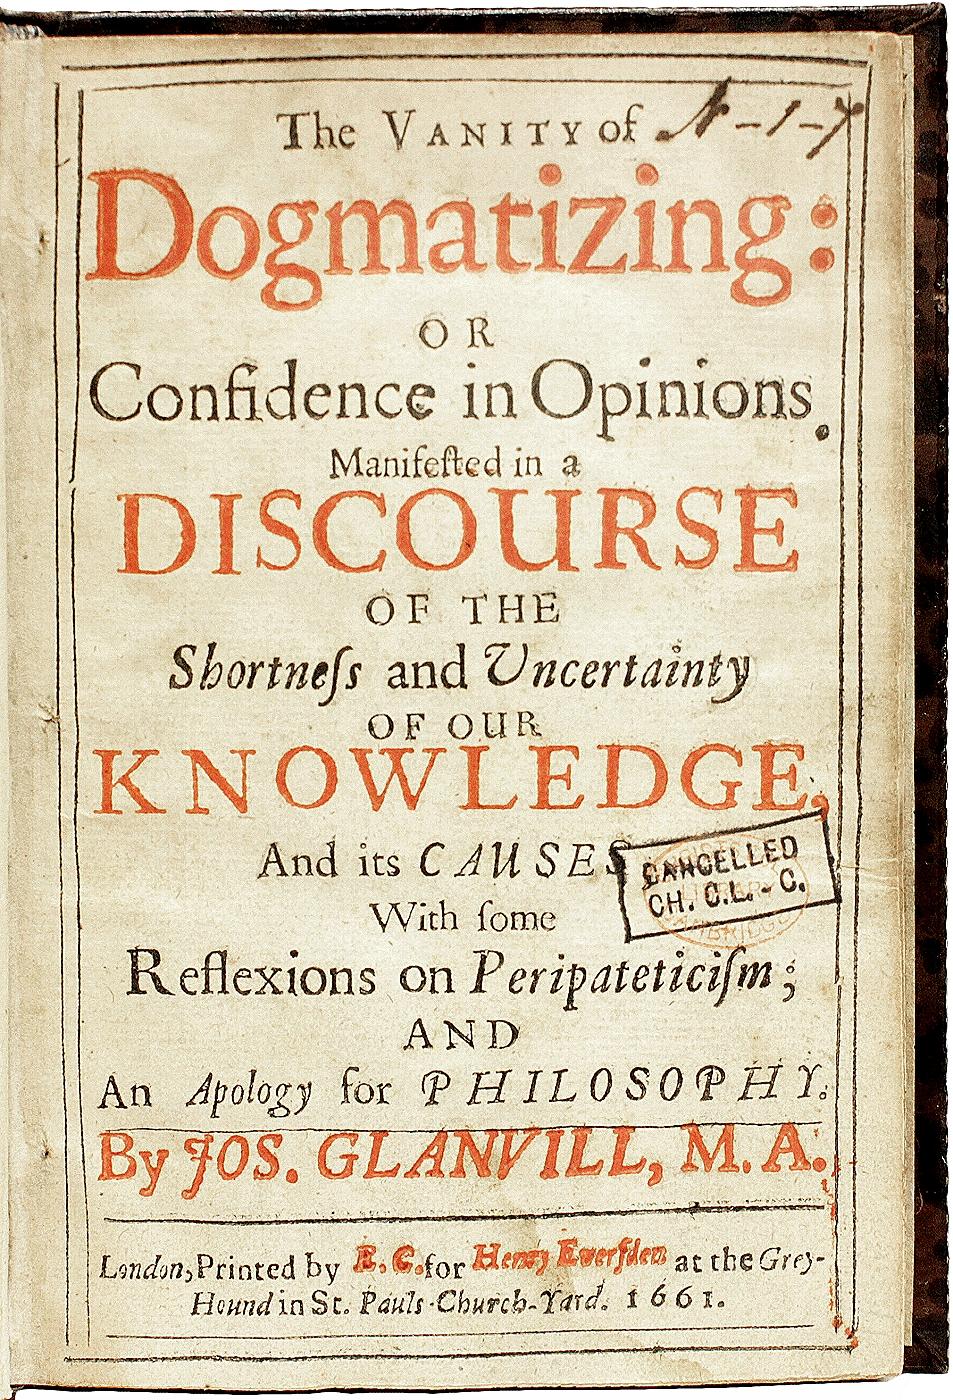 AUTHOR: GLANVILL, Joseph. 

TITLE: The Vanity of Dogmatizing: Or Confidence in Opinions Manifested in a Discourse of the Shortness and Uncertainty of Our Knowledge, and Its Causes, with Some Reflexions on Peripateticism; and an Apology for